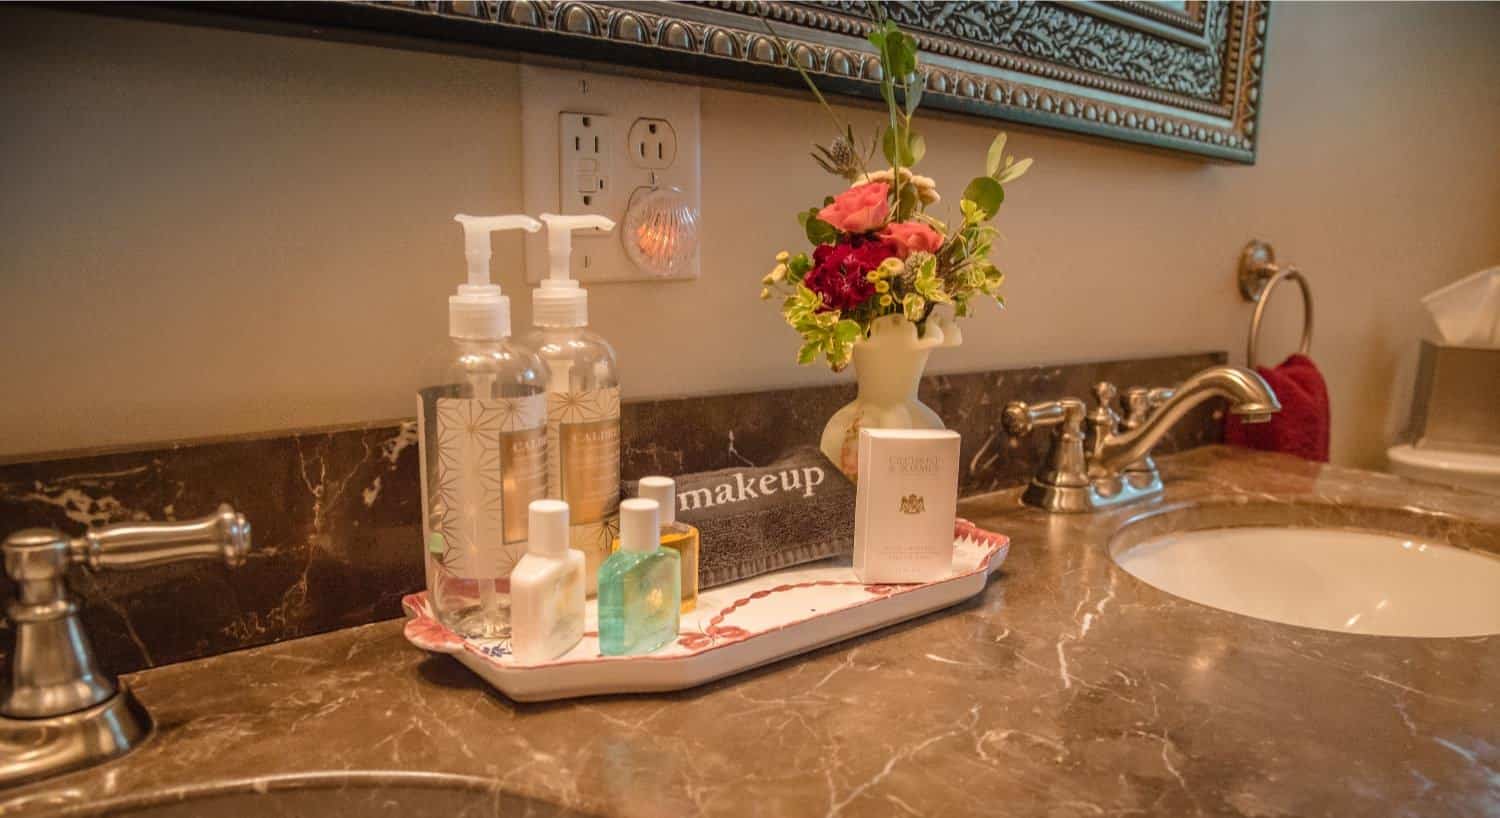 Bathroom vanity with a tray including soaps and lotions and small bouquet of fresh flowers